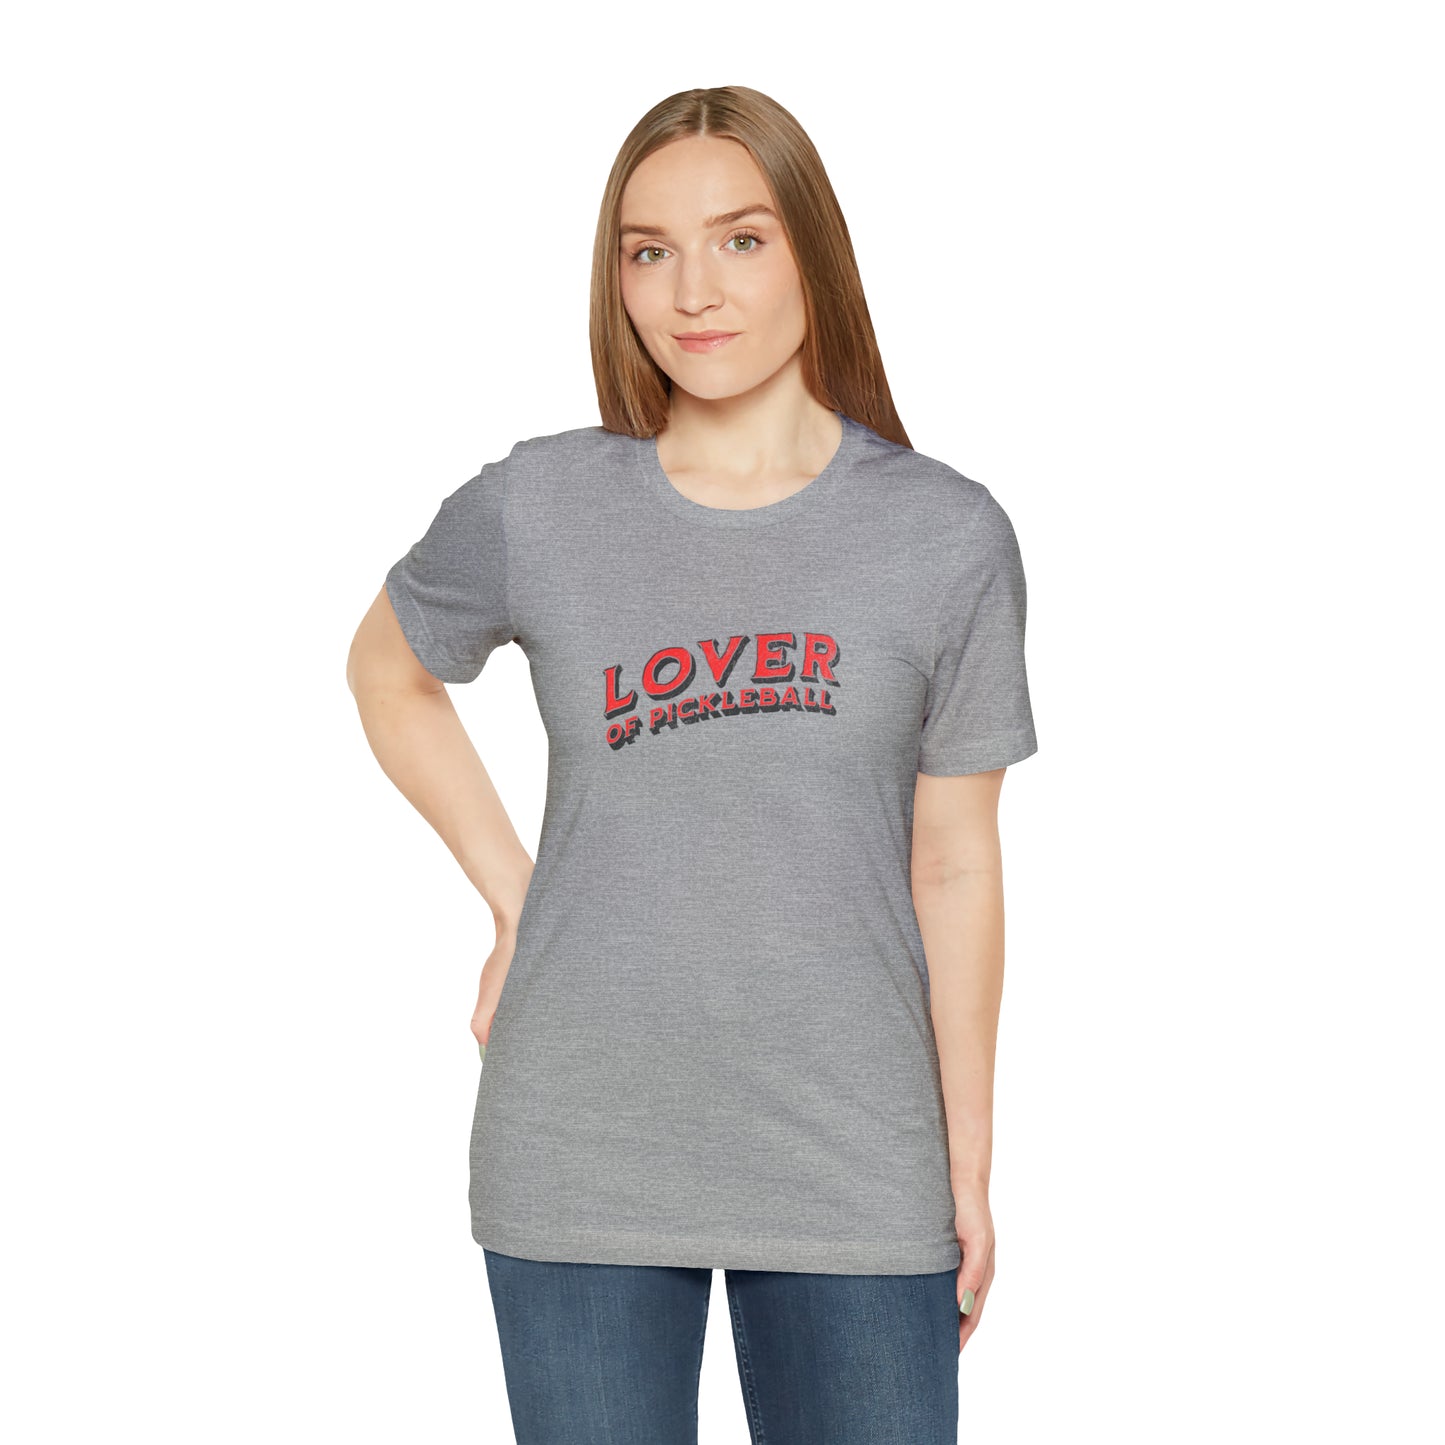 Lover of Pickleball - Comfy Cotton T-Shirt